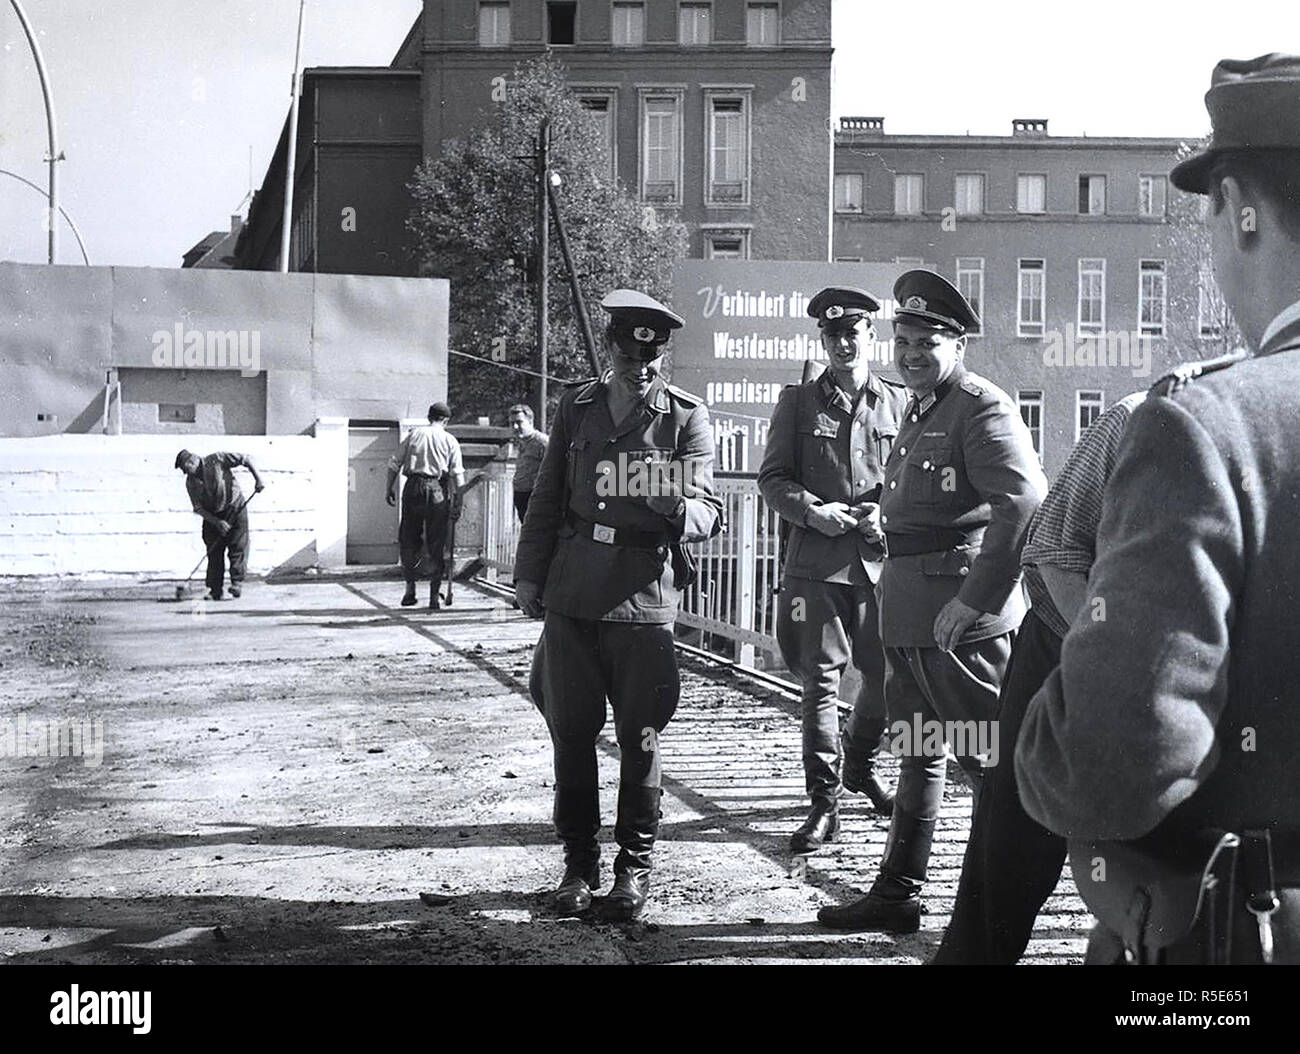 9/24/1964 - Guarded Street Workers at Sandkrug Bridge Stock Photo